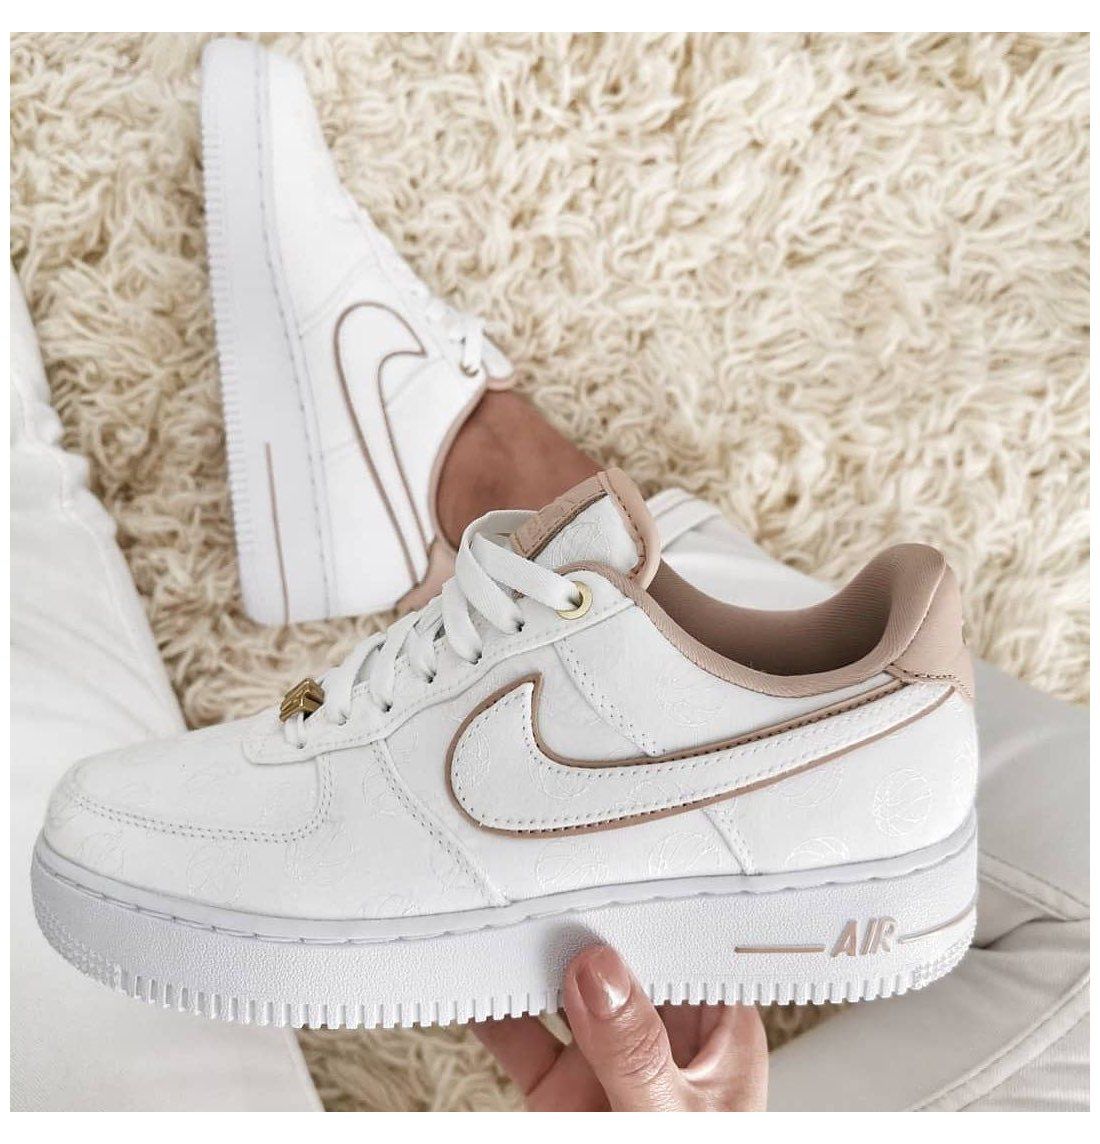 Buy > style air force 1 womens > in stock